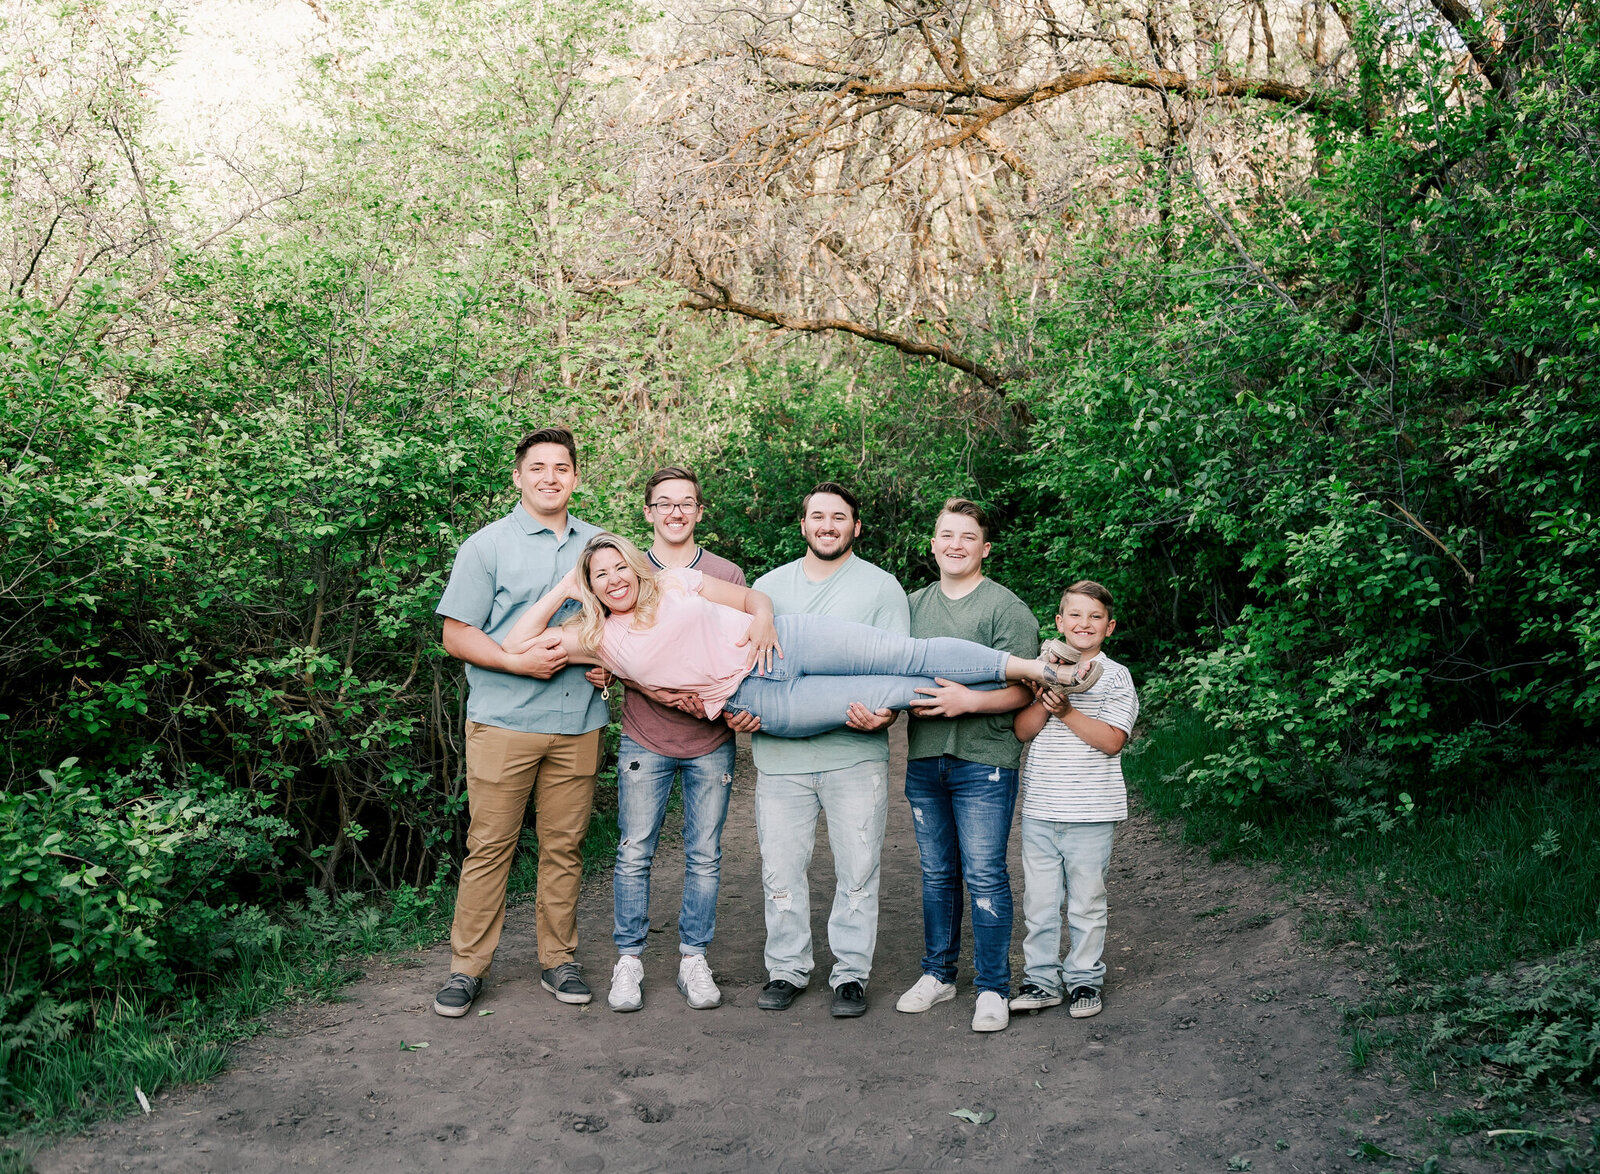 A family of boys holds up their mother in a fun pose during an outdoor family session.